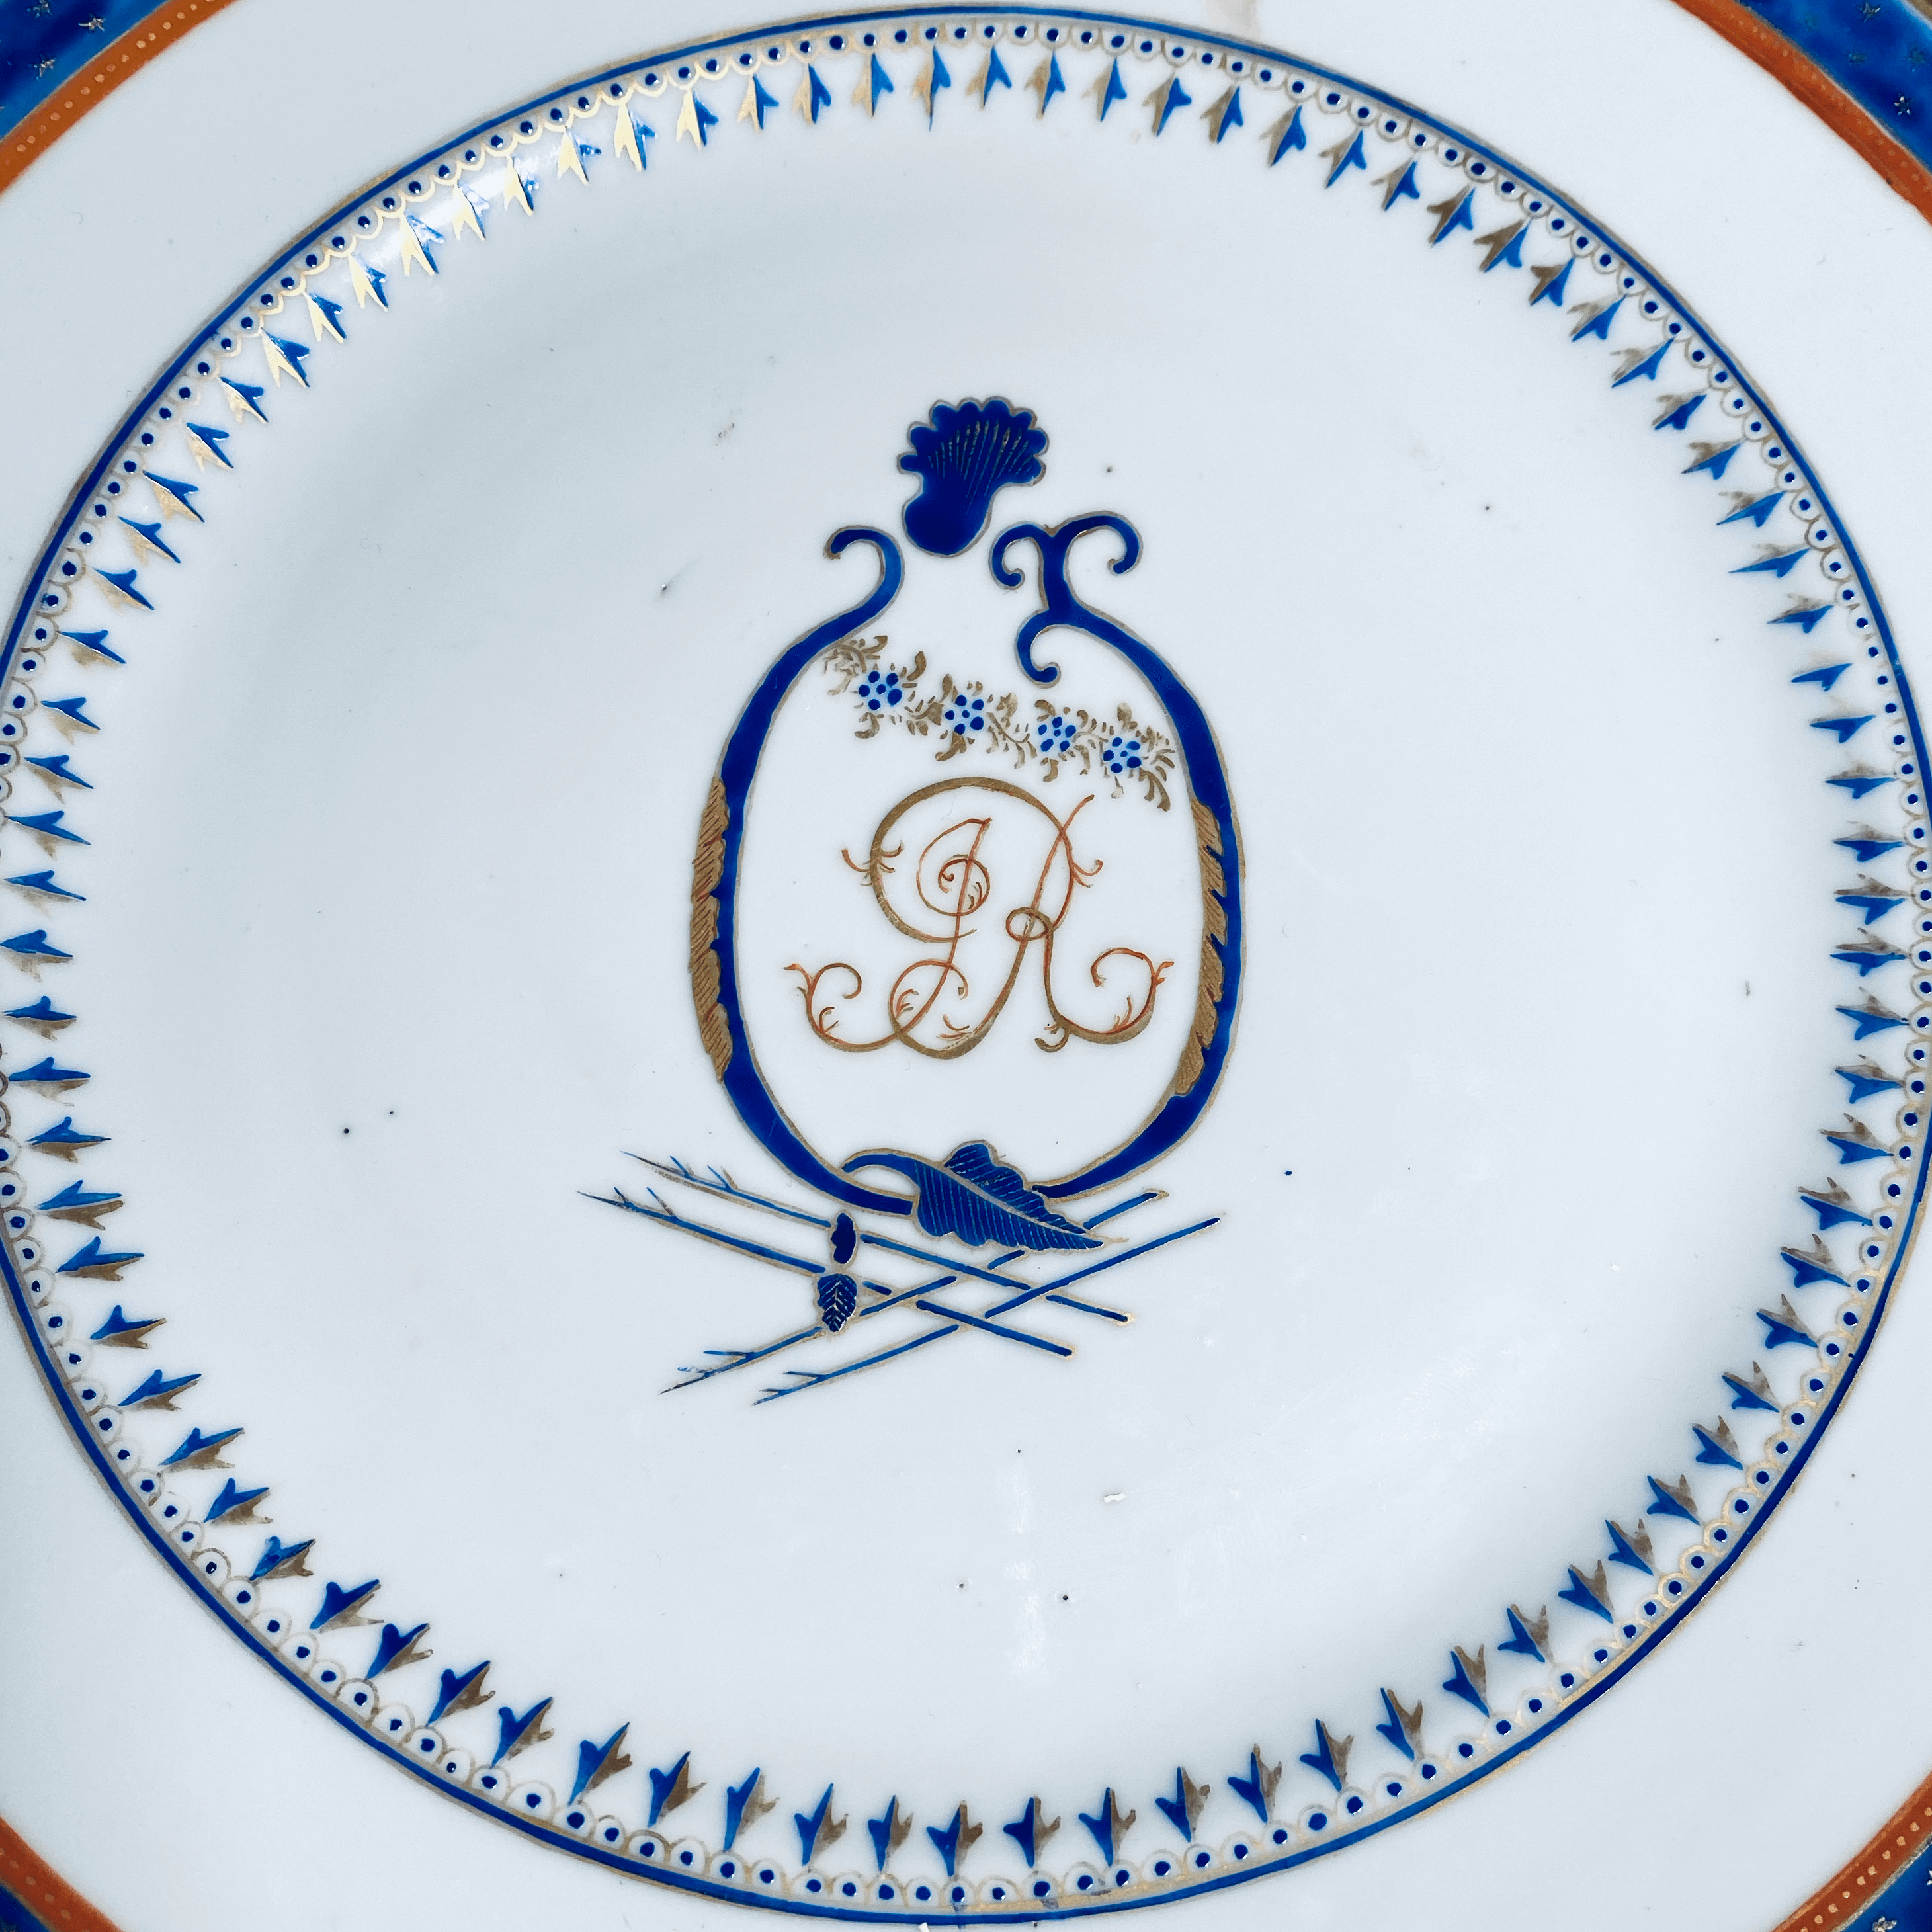 Chinese Export Porcelain Plate circa 1800